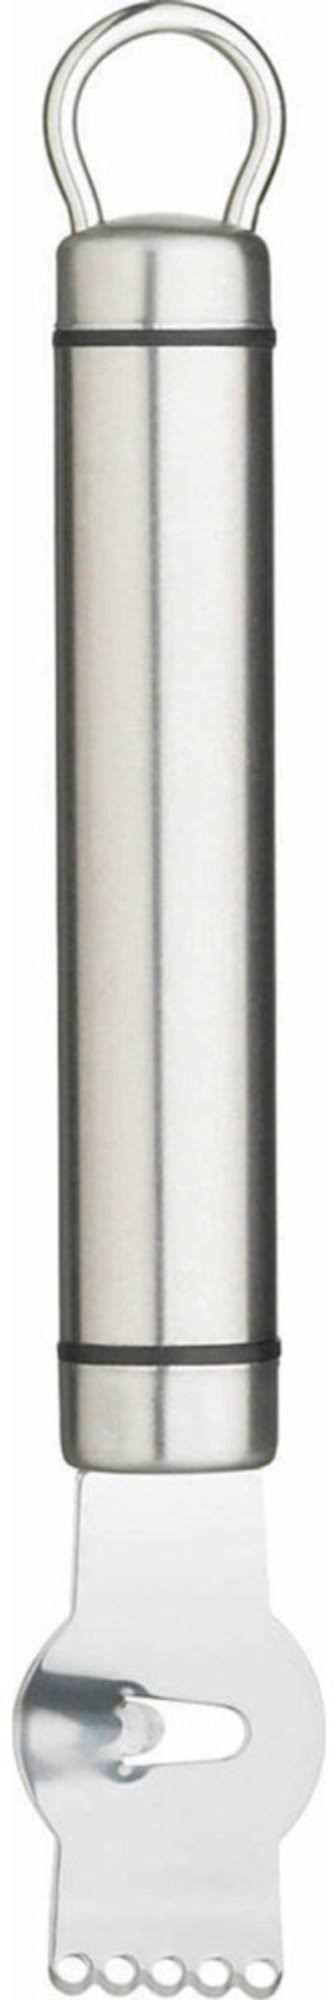 Kitchen Craft Professional Zester - Stainless Steel, Short, Oval Handle